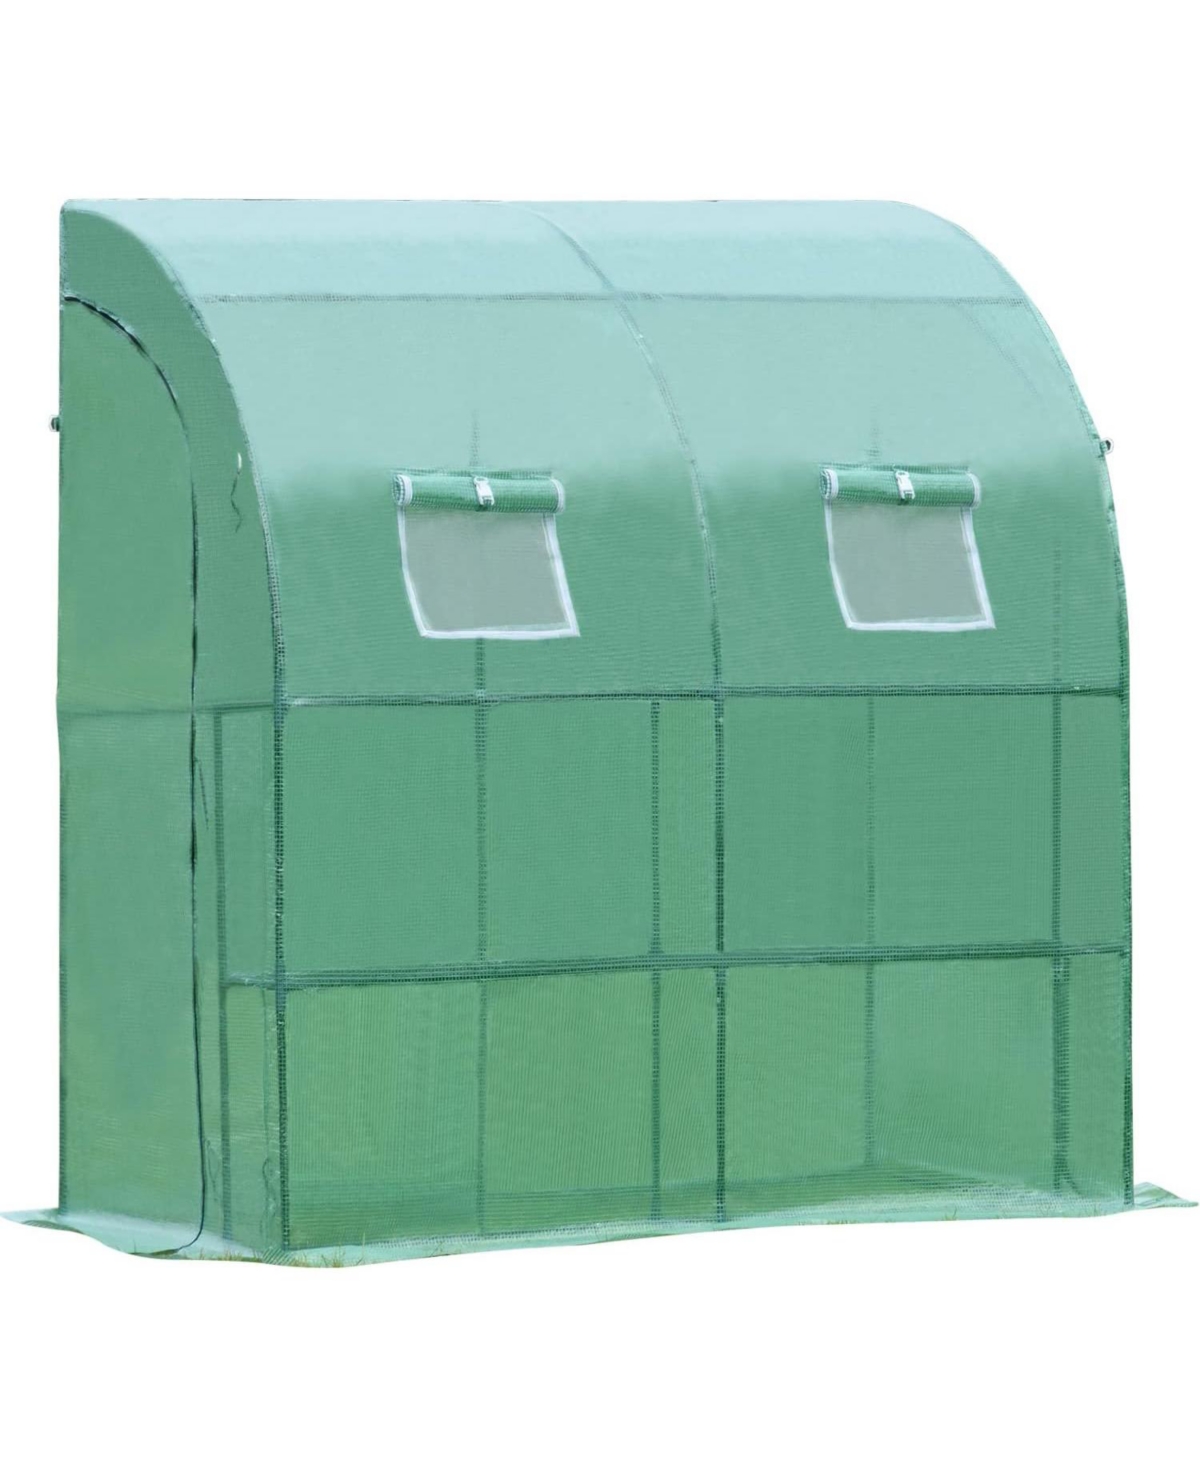 6.3ft. x 3.3ft. x 7.2ft. Green Walk-in Greenhouse Lean to Portable Wall Two Zipper Door - White